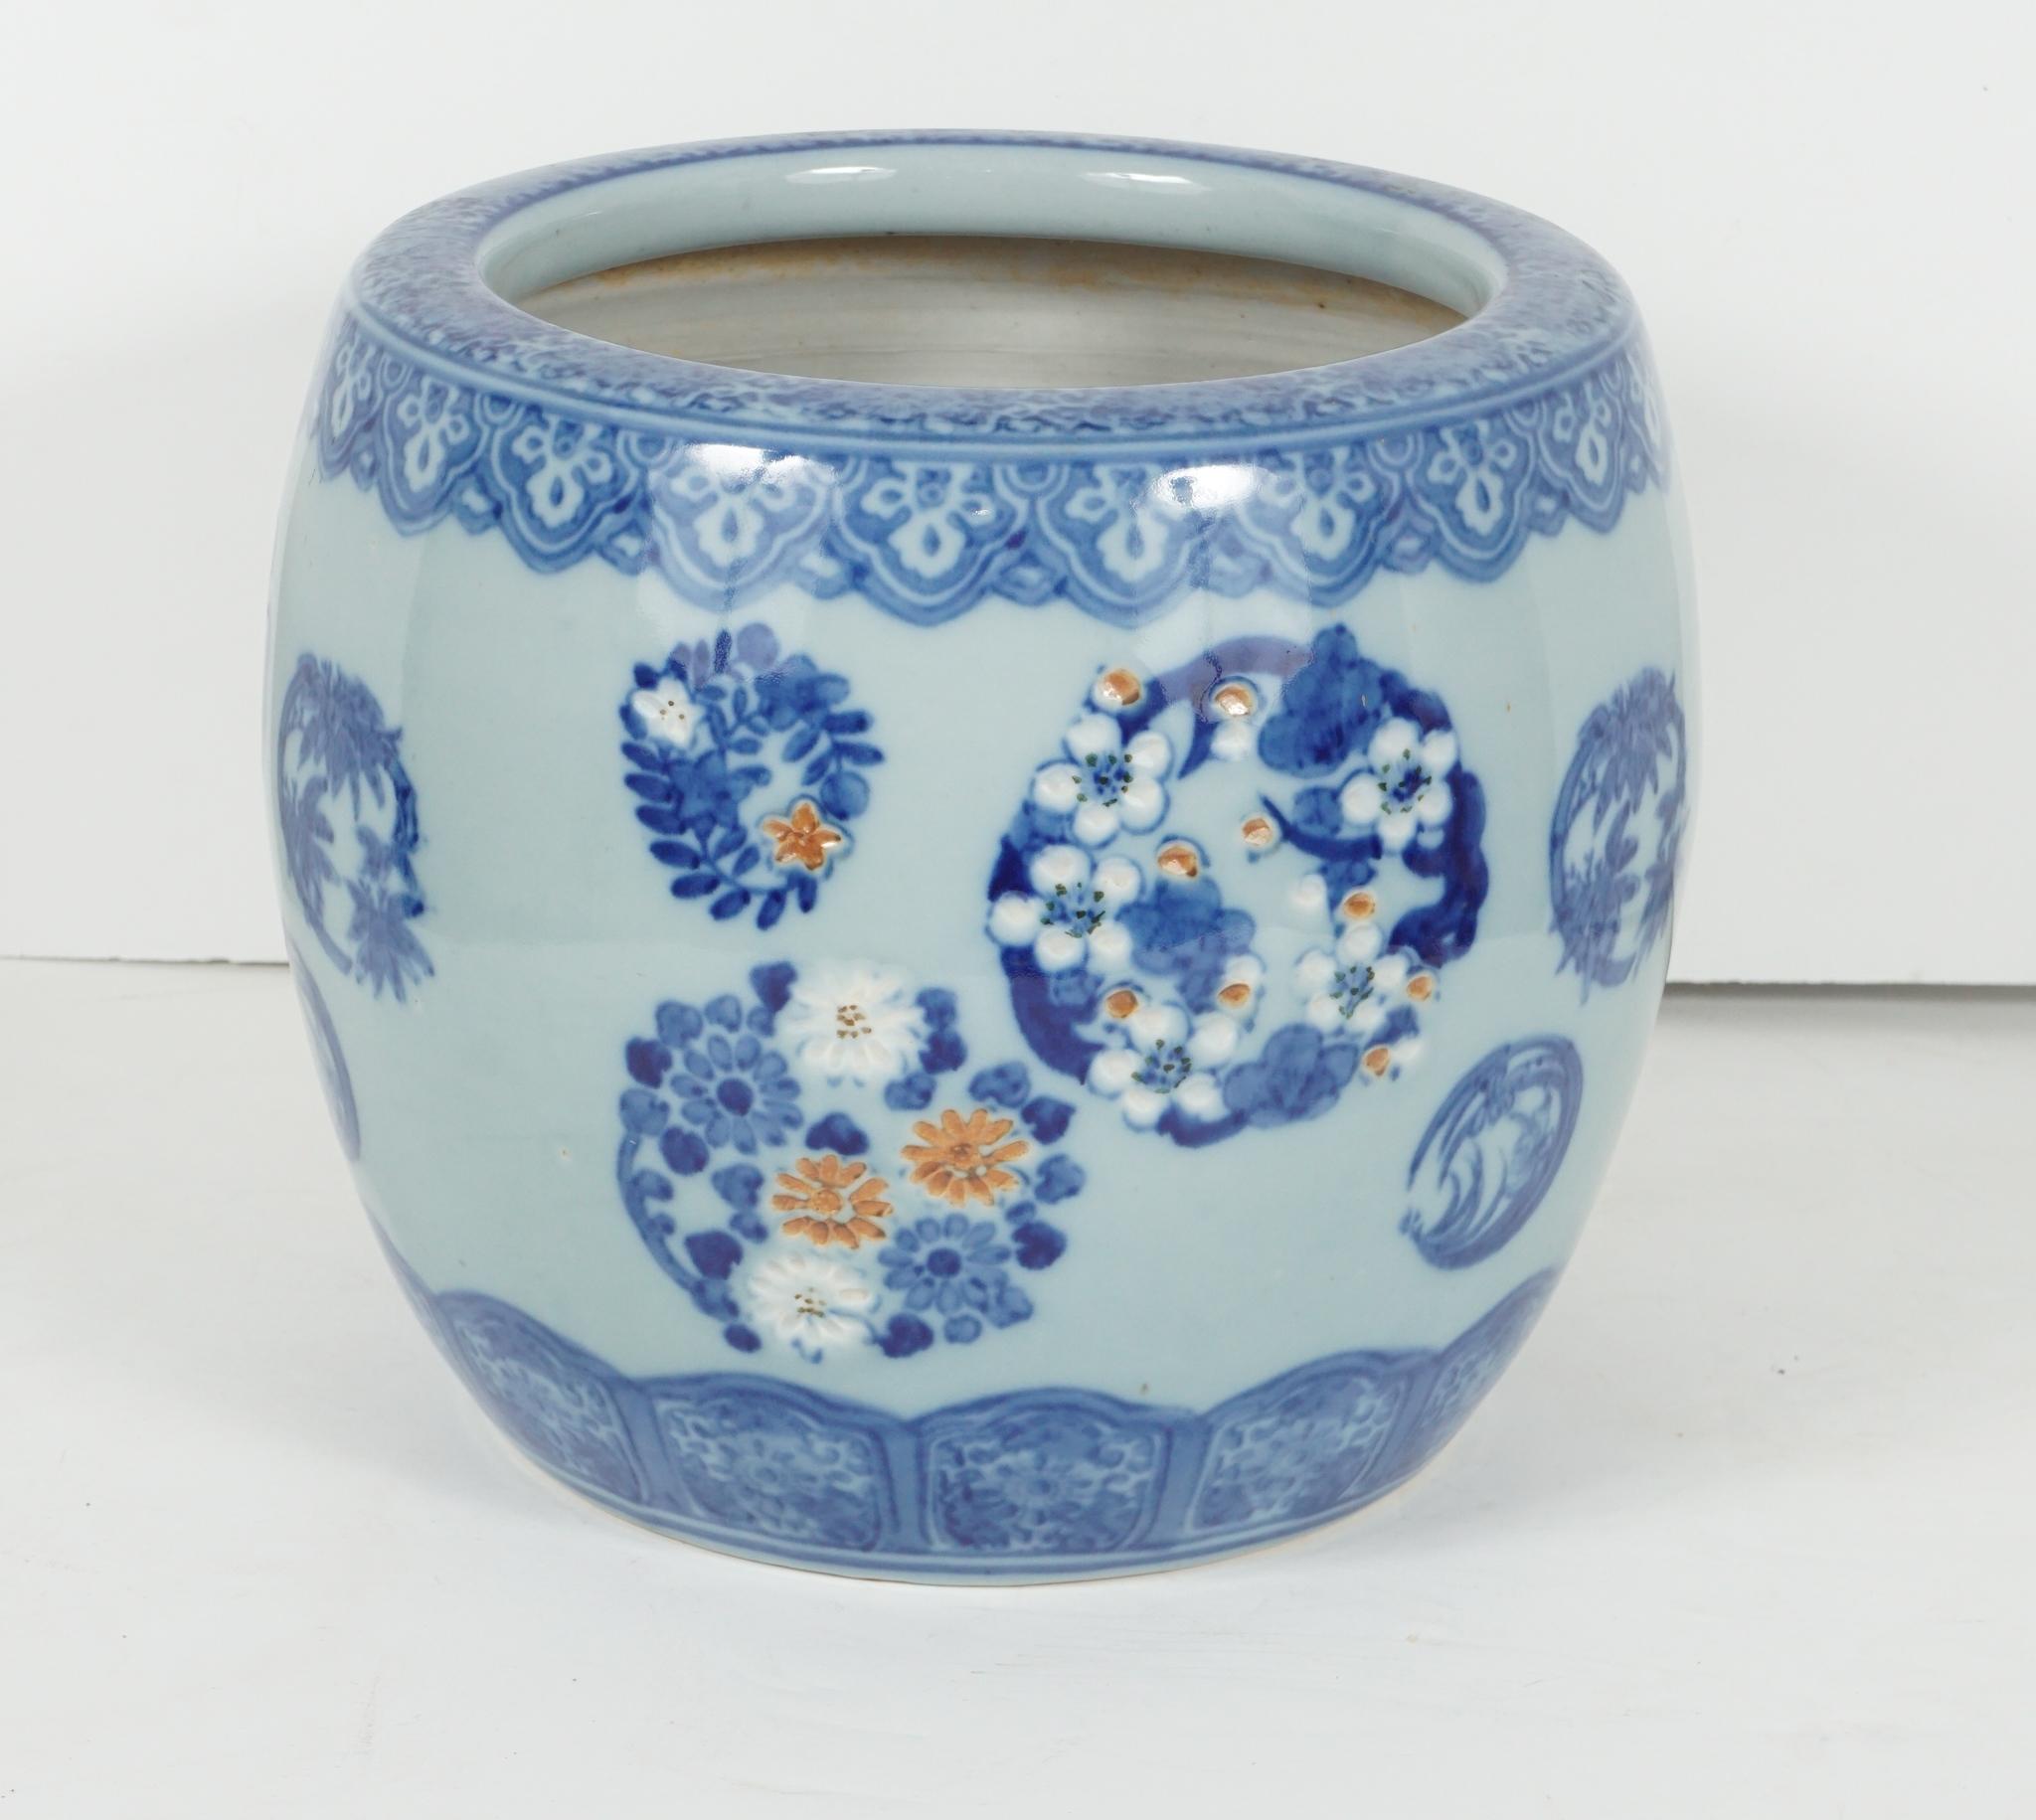 This porcelain Japanese hibachi or “Fire Bowl” was made in Japan circa 1900 to 1925. This is a traditional Japanese heating device and consists of a fireproof cylinder or box that can be made of many materials. This porcelain one is done in a